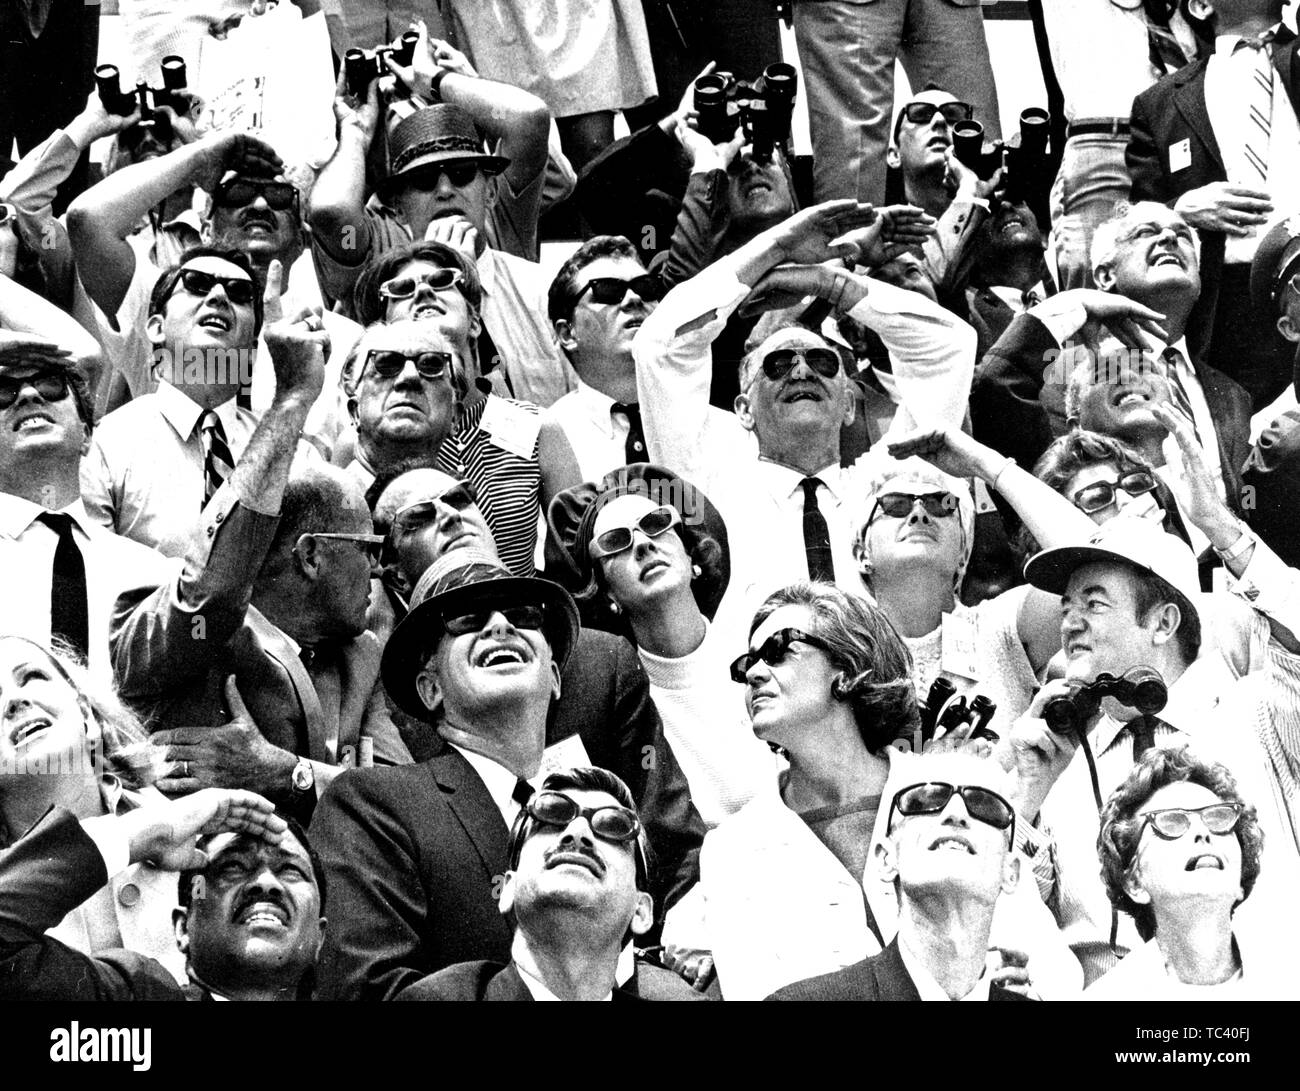 NASA members with guests watching the Apollo 10 liftoff, including Albert Siepert, Belgium's King Baudouin and Queen Fabiola, Mrs Siepert, and Mr And Mrs Emil Mosbacher, May 18, 1969. Image courtesy National Aeronautics and Space Administration (NASA). () Stock Photo